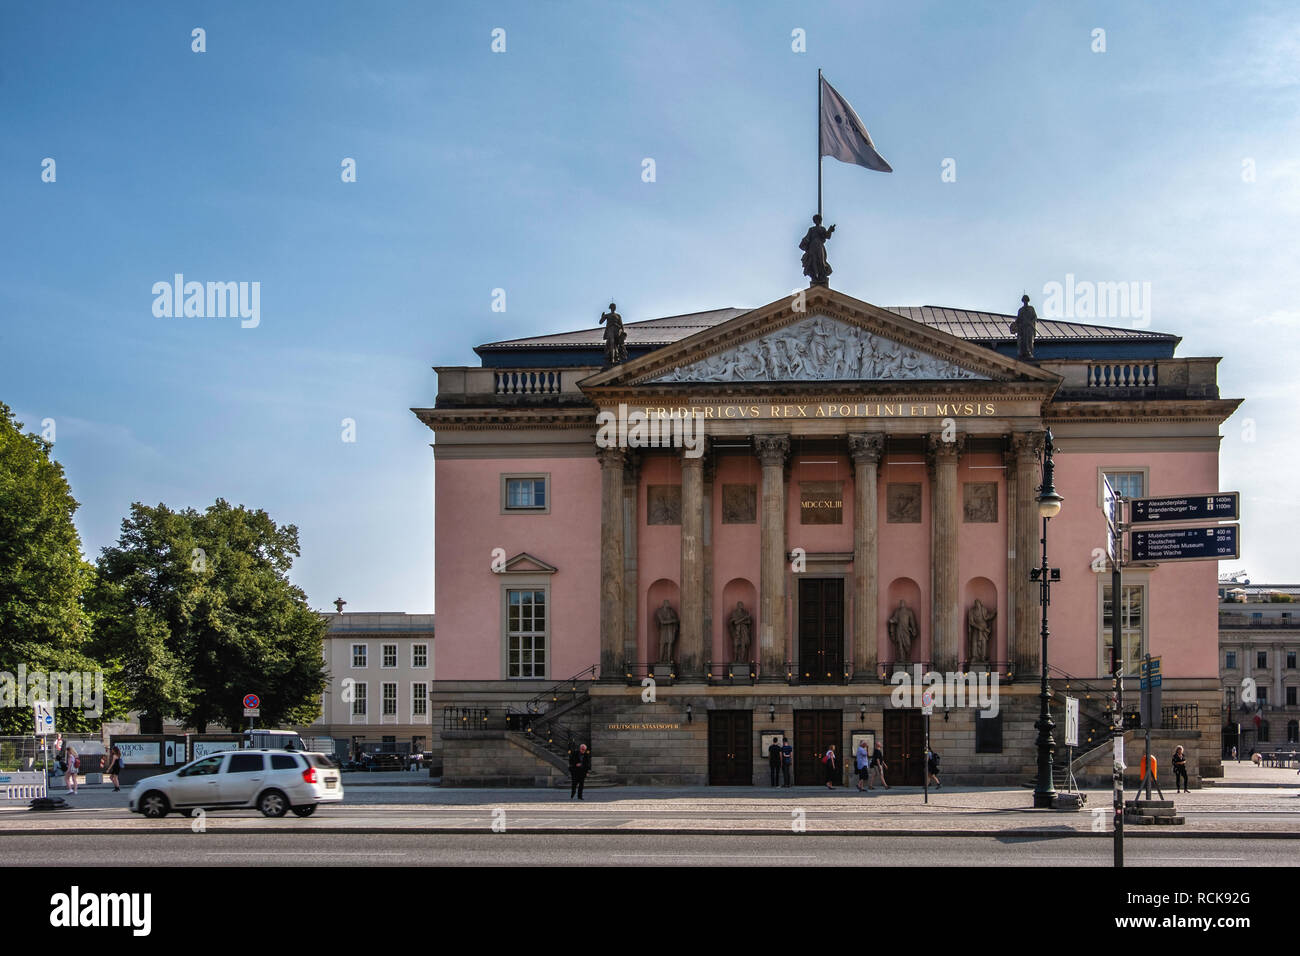 Berlin,Mitte, Unter den Linden. State Opera House - Old historic Neo-classical building newly re-opened after reconstruction.                          Stock Photo